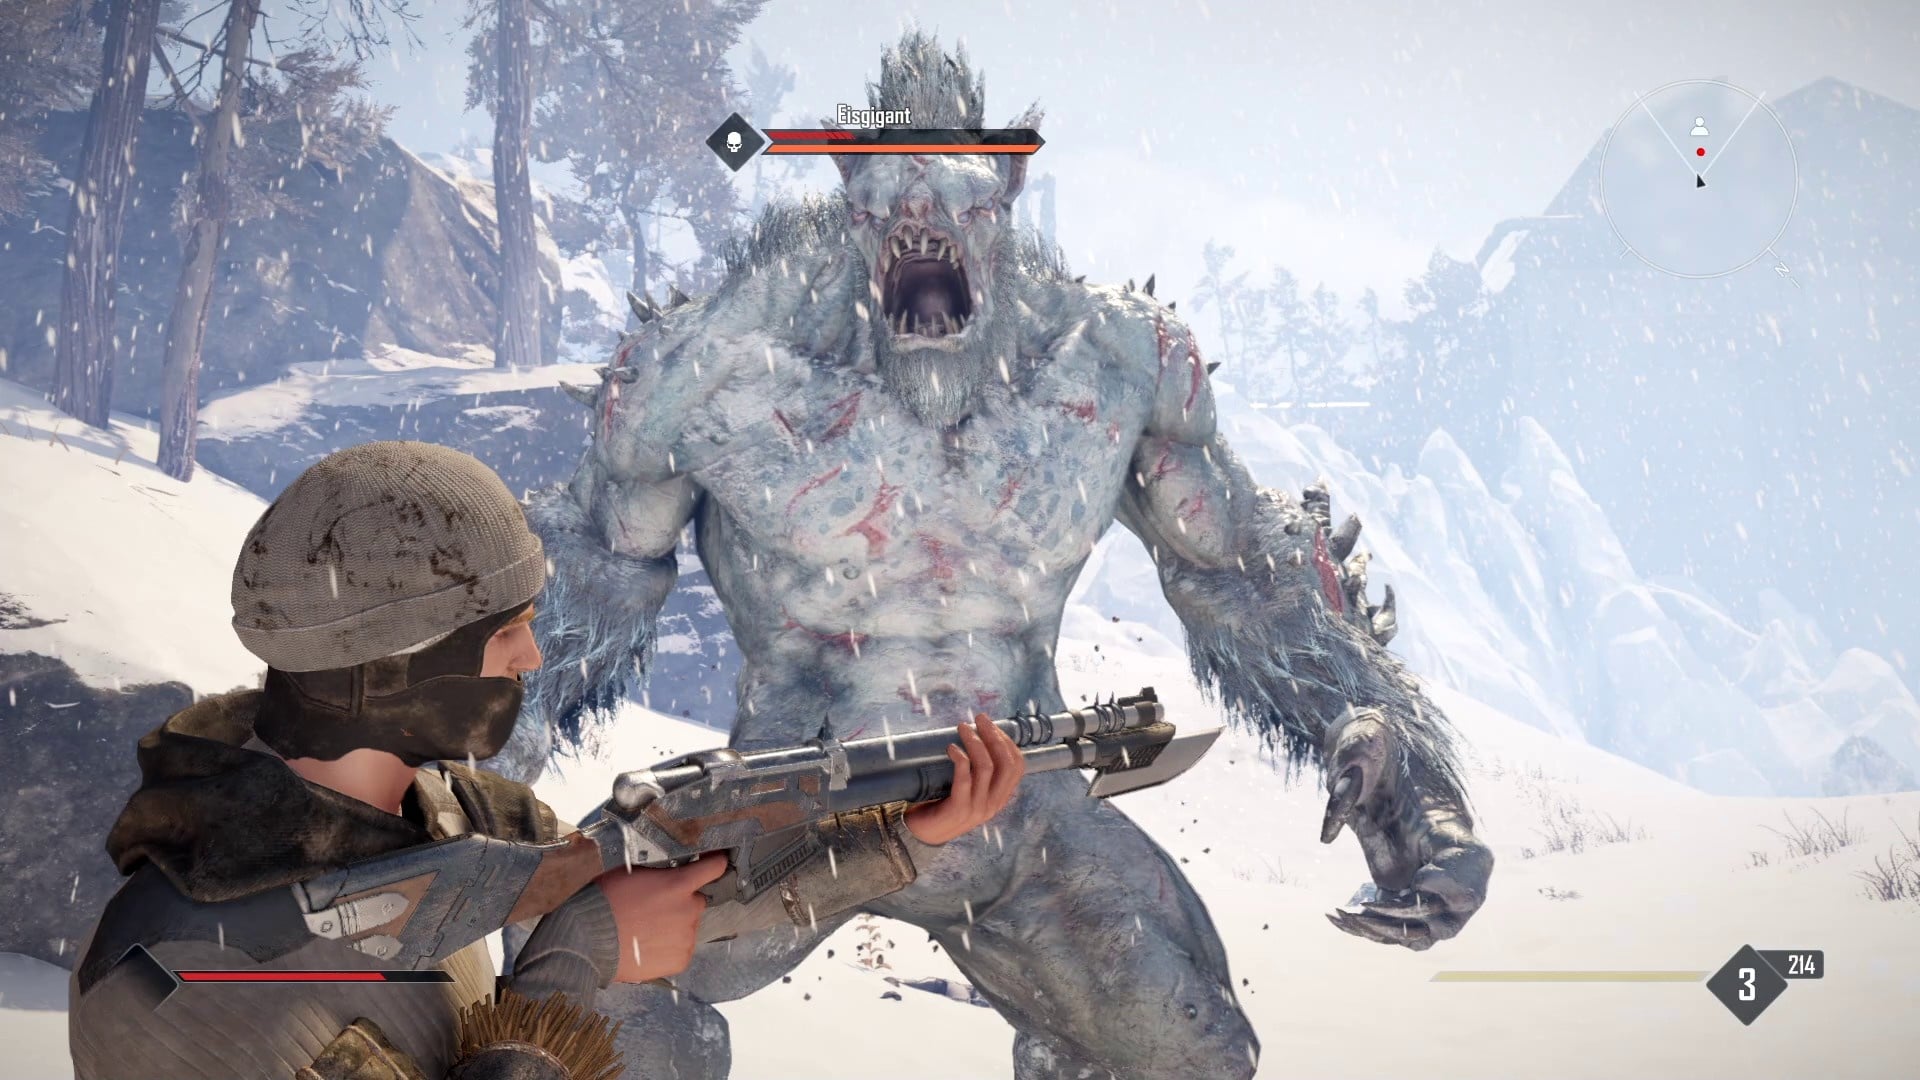 The skull above this oversized yeti gives a subtle hint: Run, you fools!